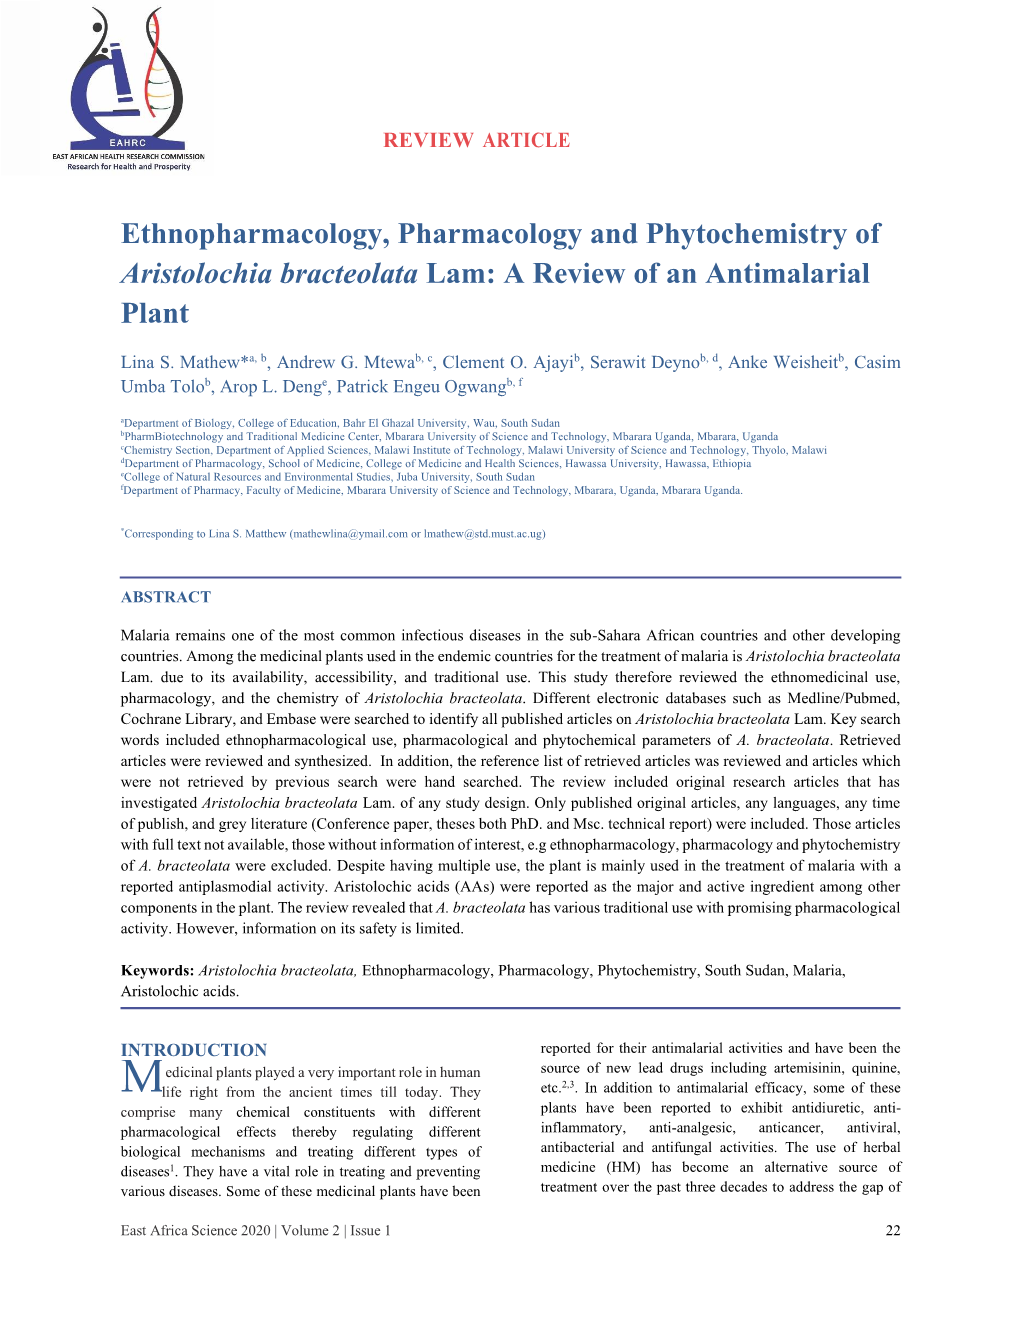 Ethnopharmacology, Pharmacology and Phytochemistry of Aristolochia Bracteolata Lam: a Review of an Antimalarial Plant